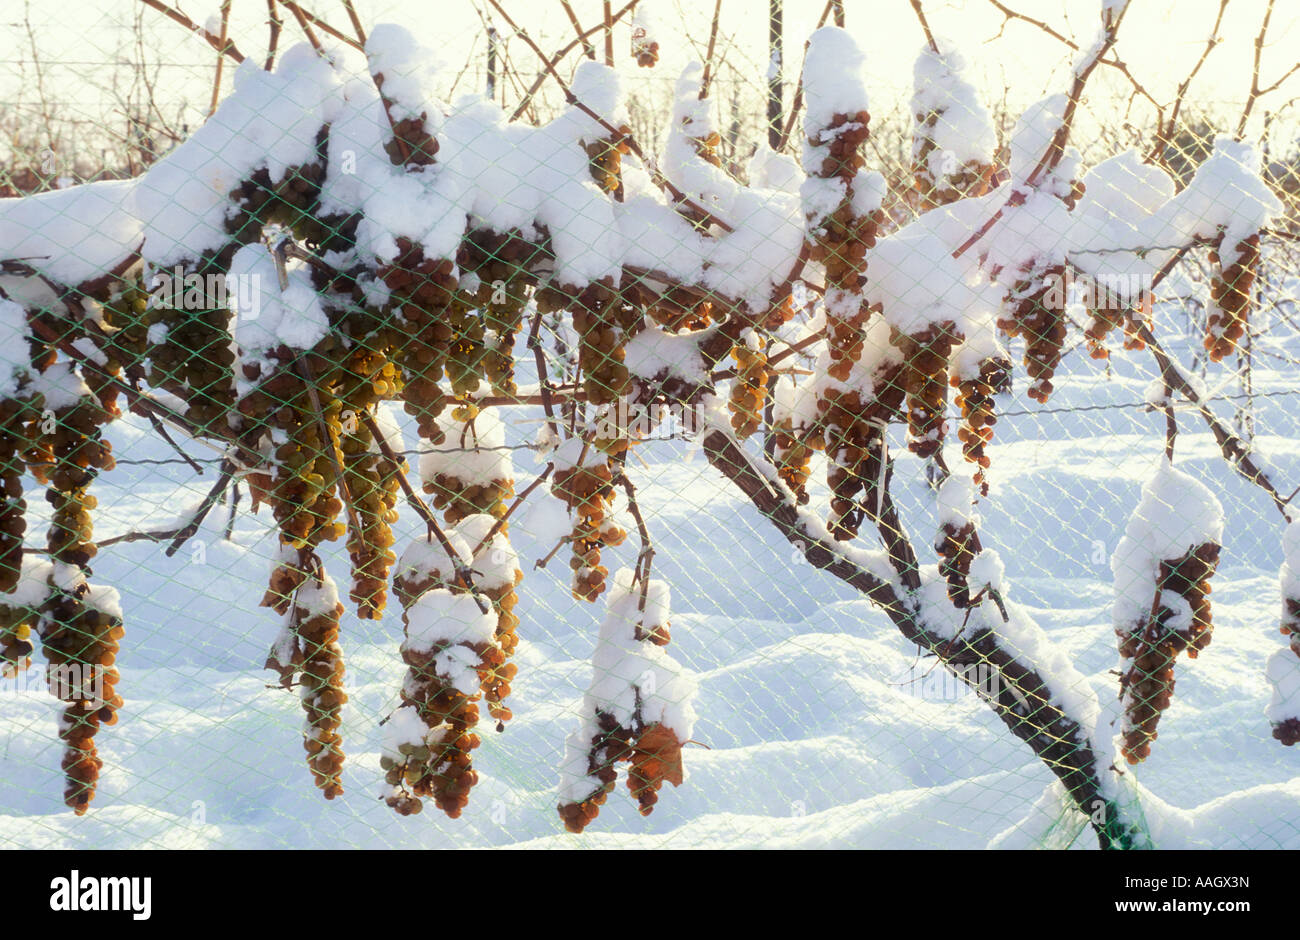 Canada Ontario Niagara on the Lake Vidal grapes left to freeze on the vine for the production of icewine Stock Photo